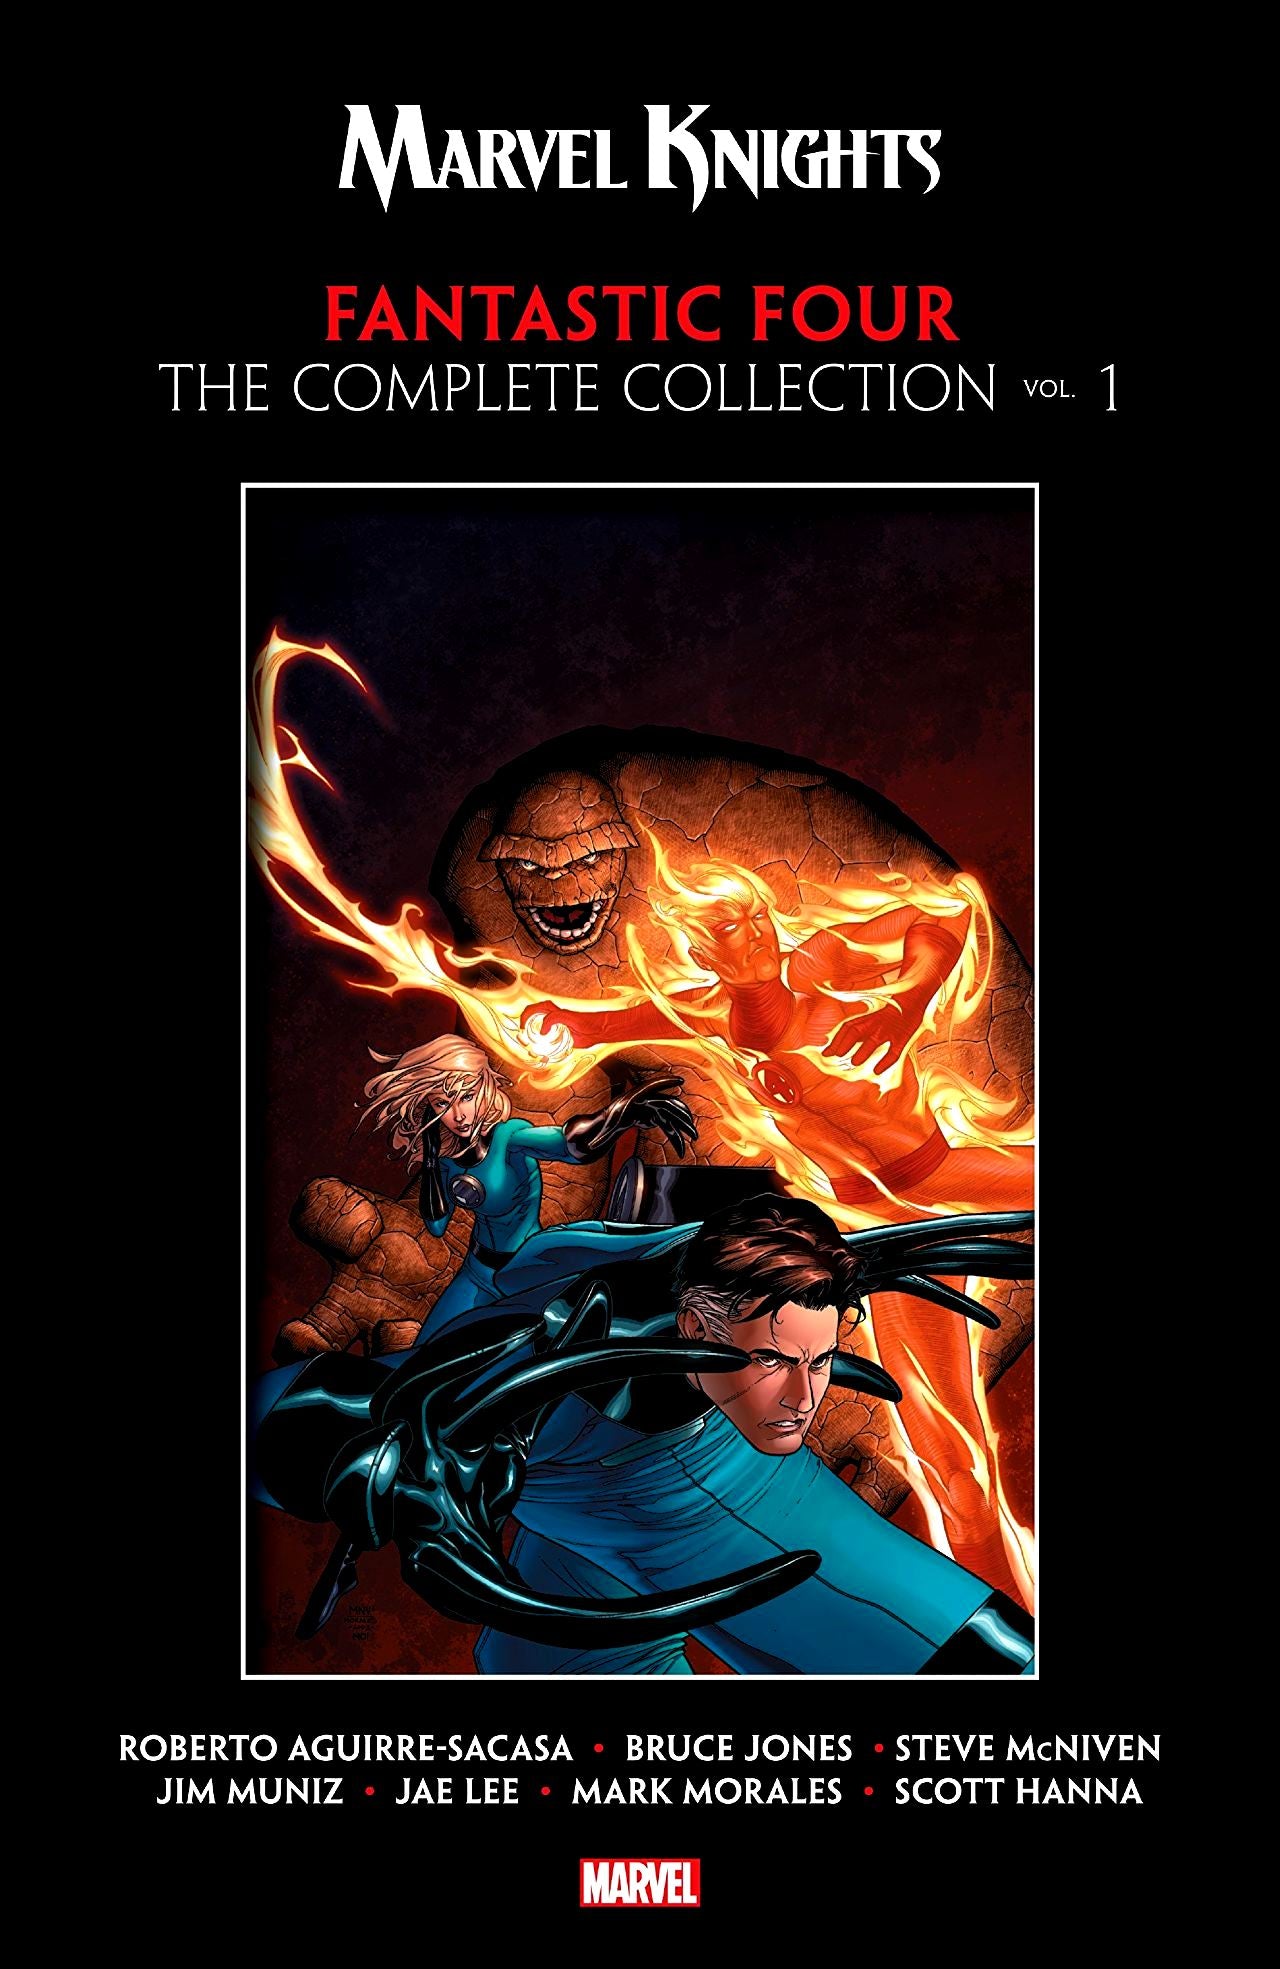 Marvel Knights: Fantastic Four - The Complete Collection Volume 1